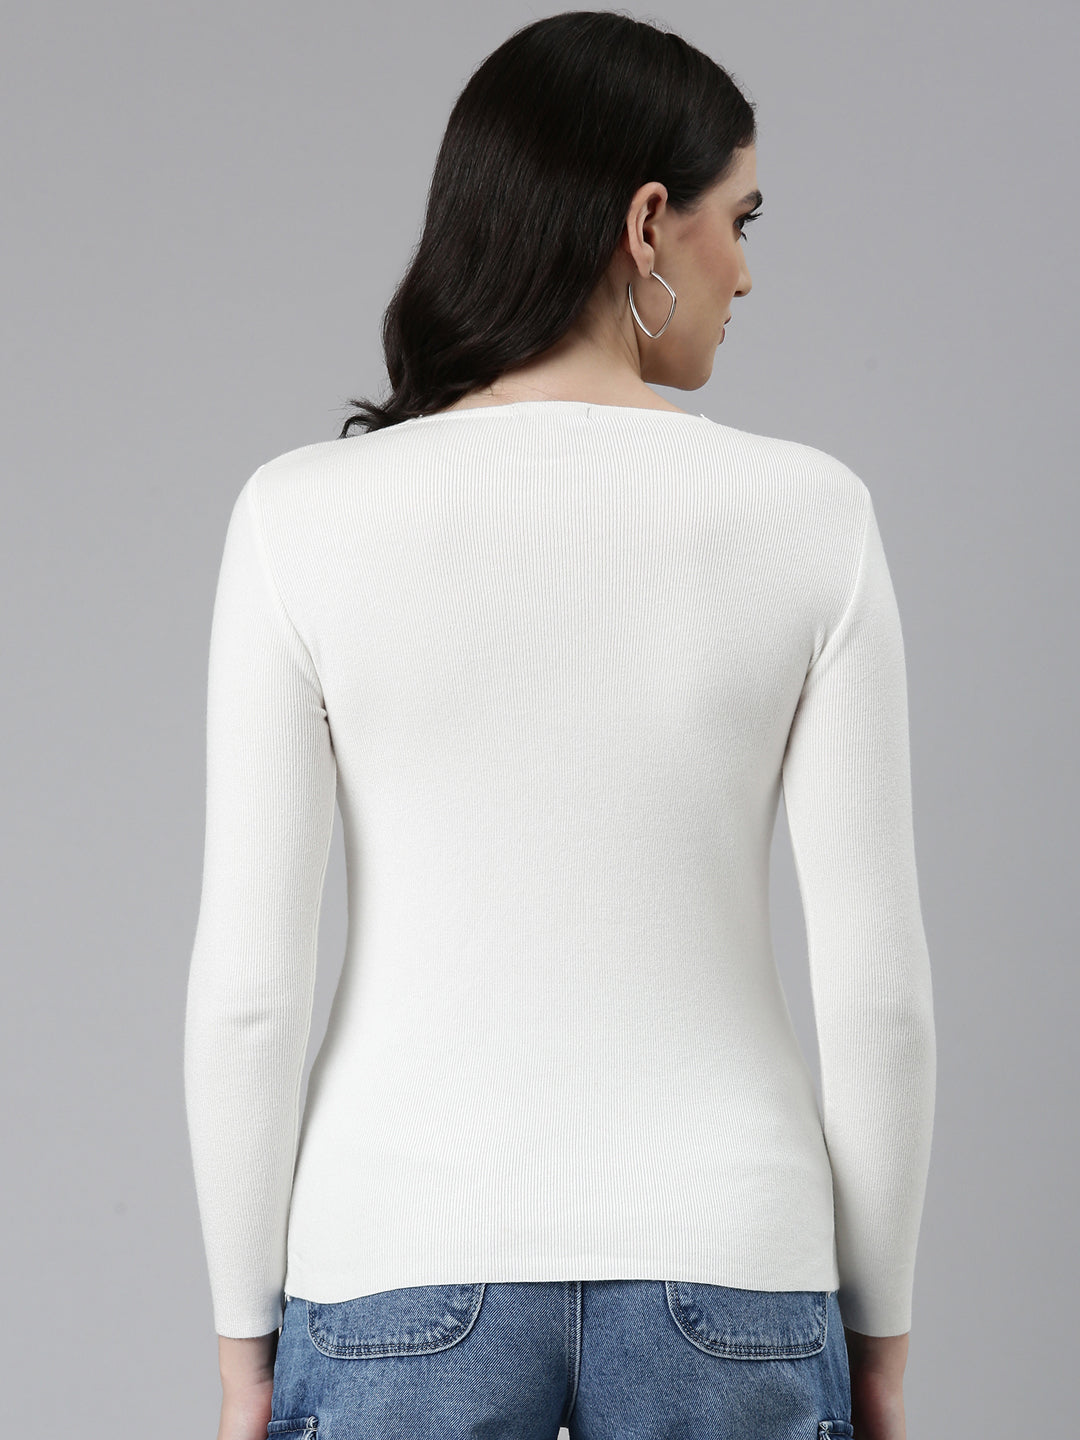 V-Neck Solid White Fitted Regular Top